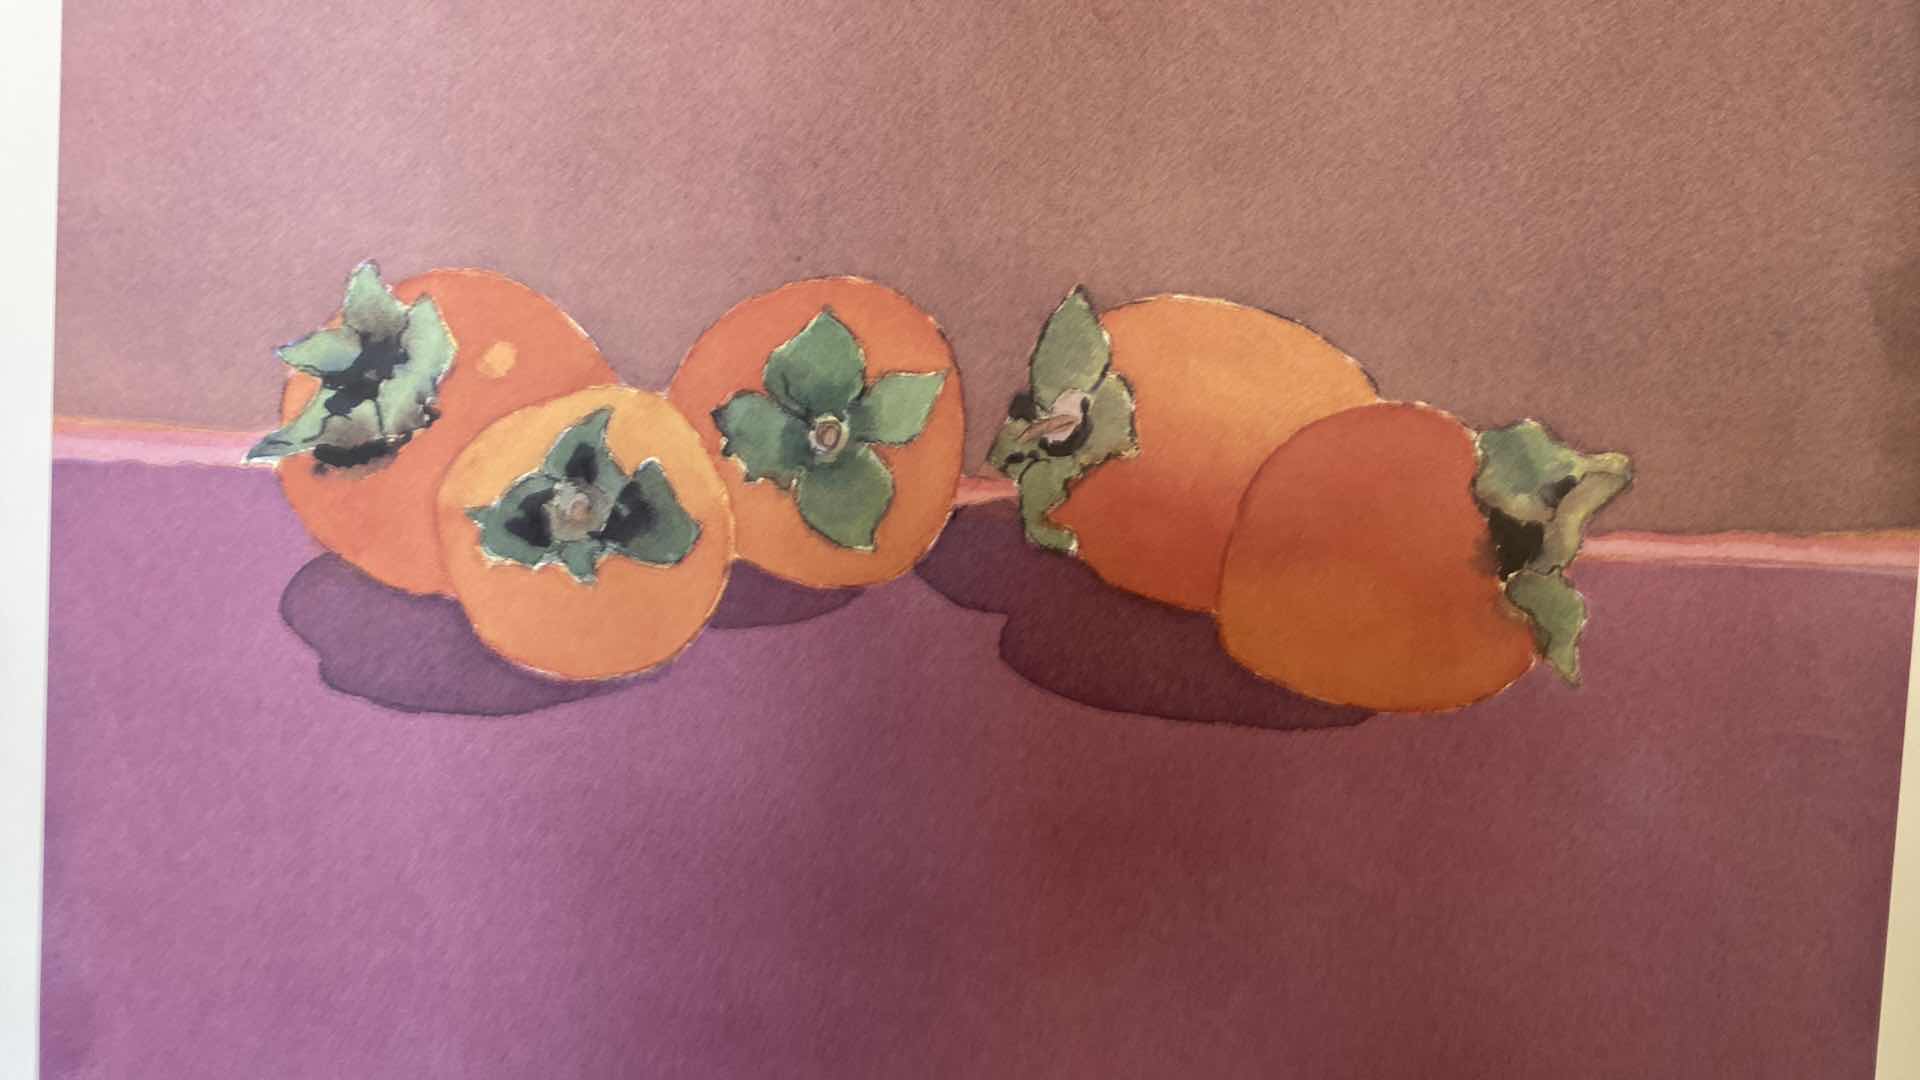 Photo 3 of UNFRAMED WATERCOLOR PERSIMMONS SIGNED ARTWORK 21” x 25”